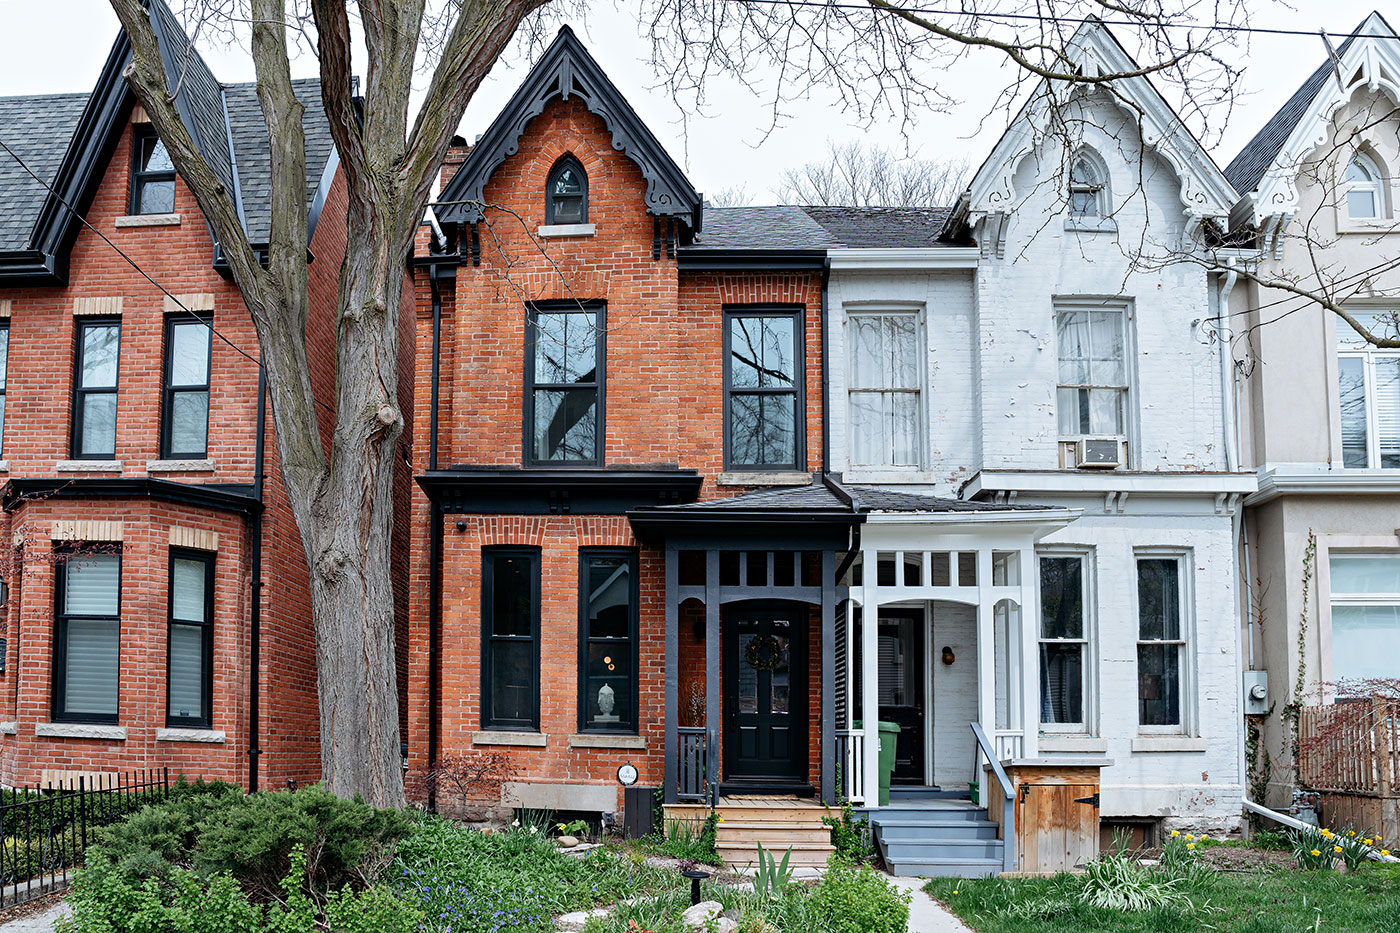 The exterior of the heritage home was meticulously restored to its former glory.